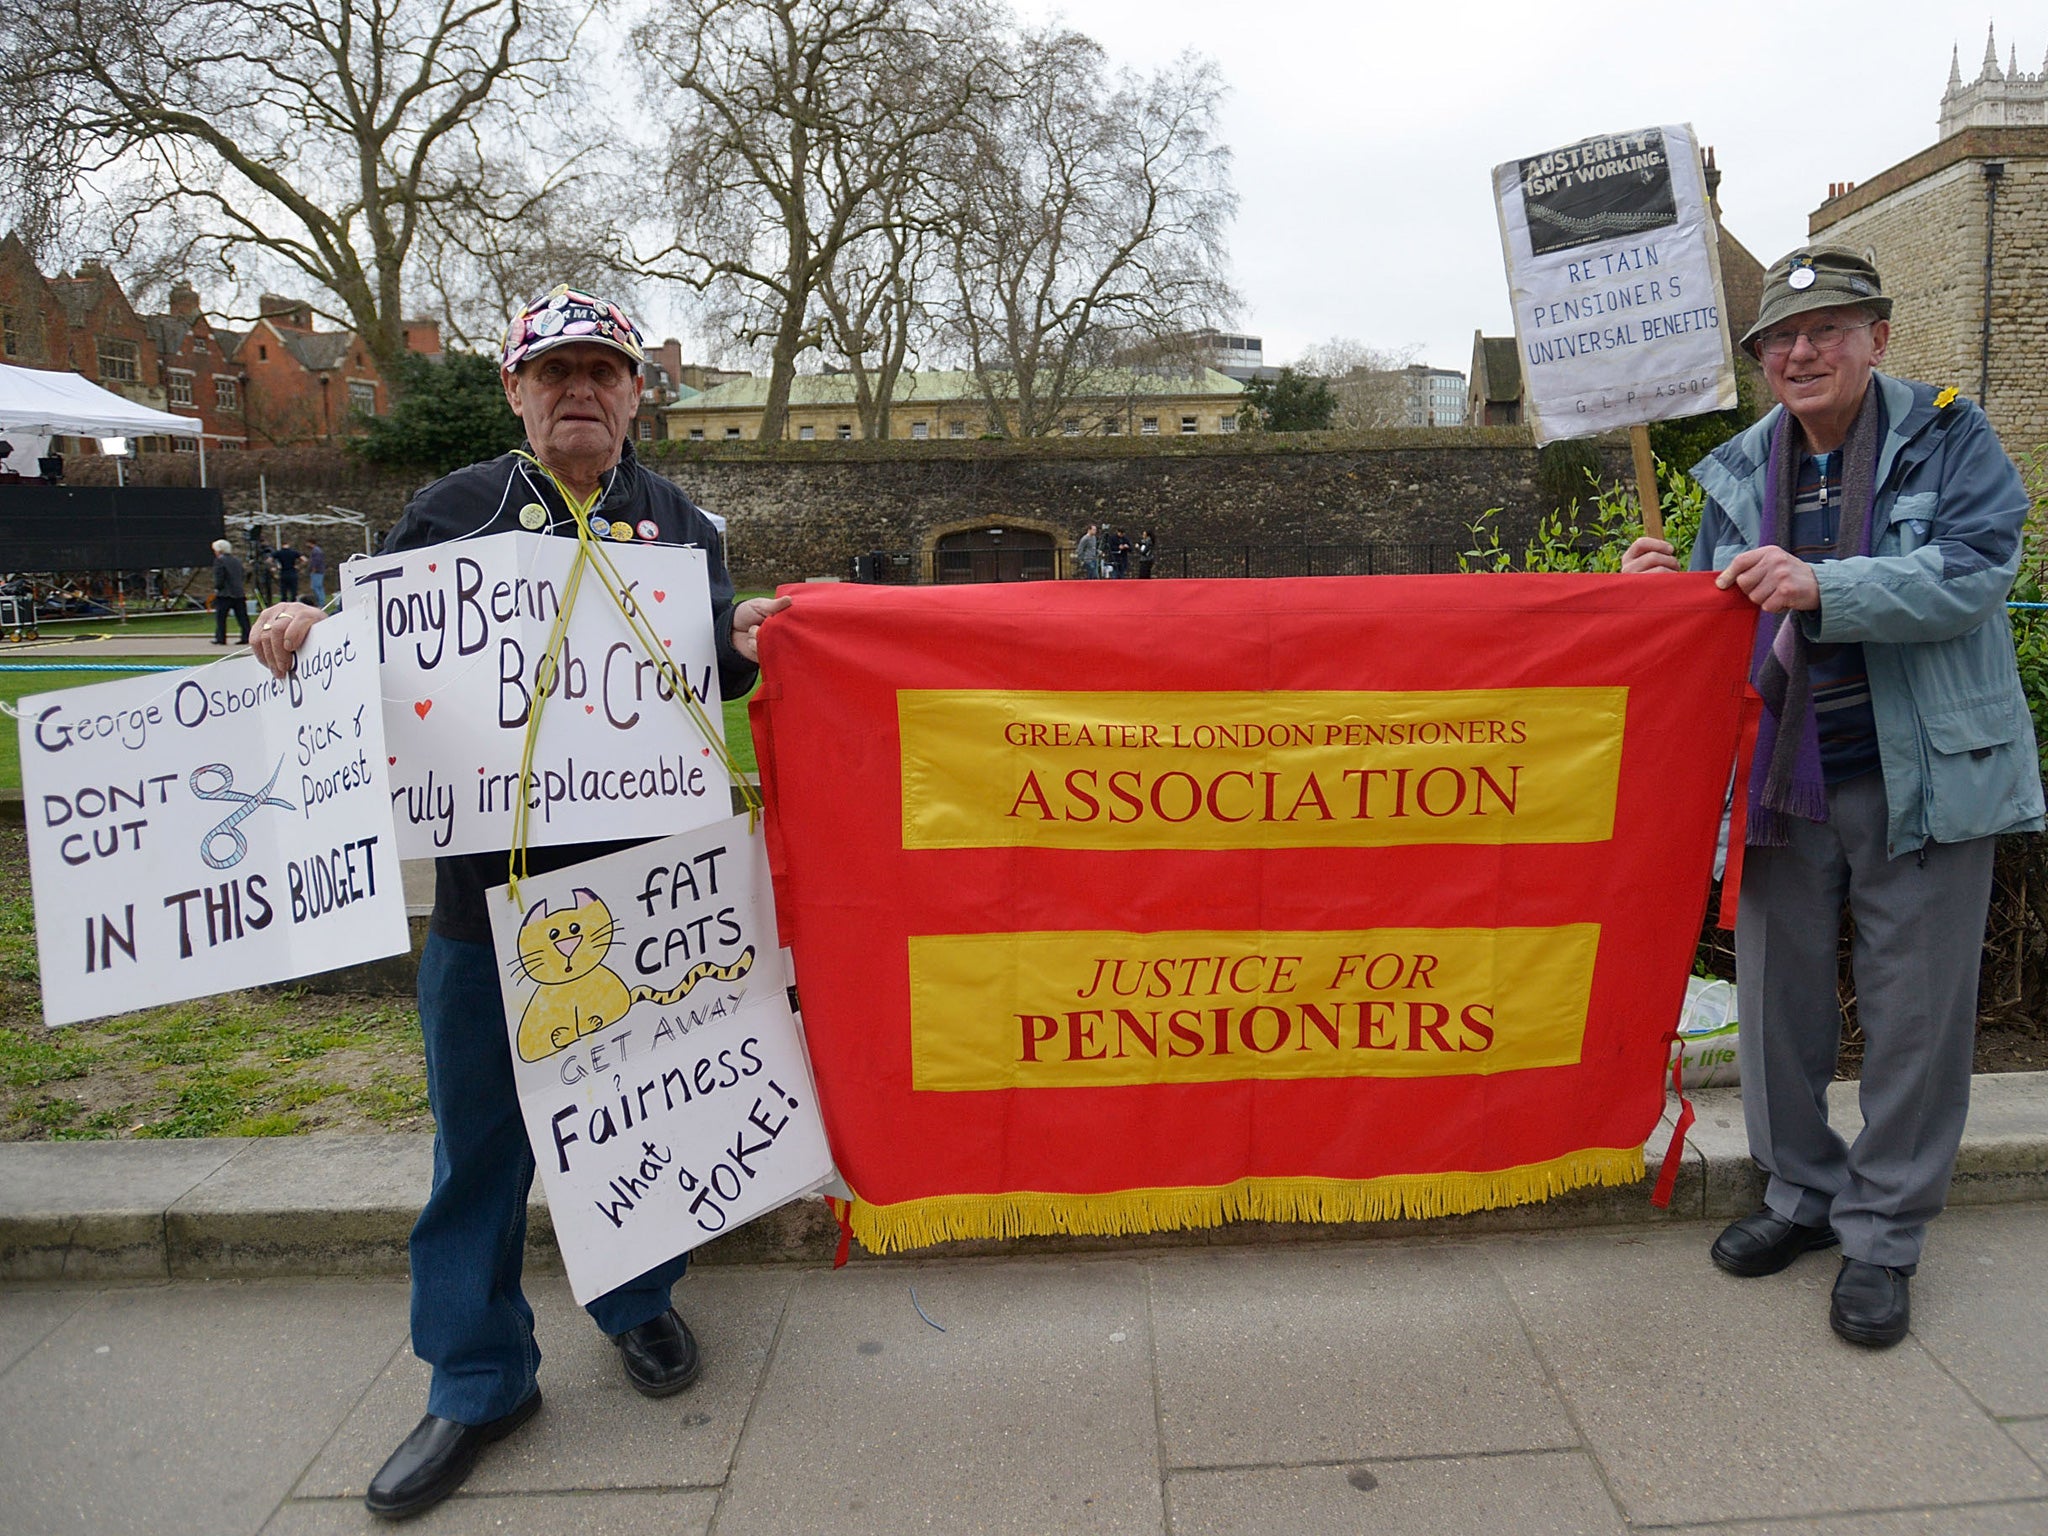 Pension protesters outside parliament during the Budget speech